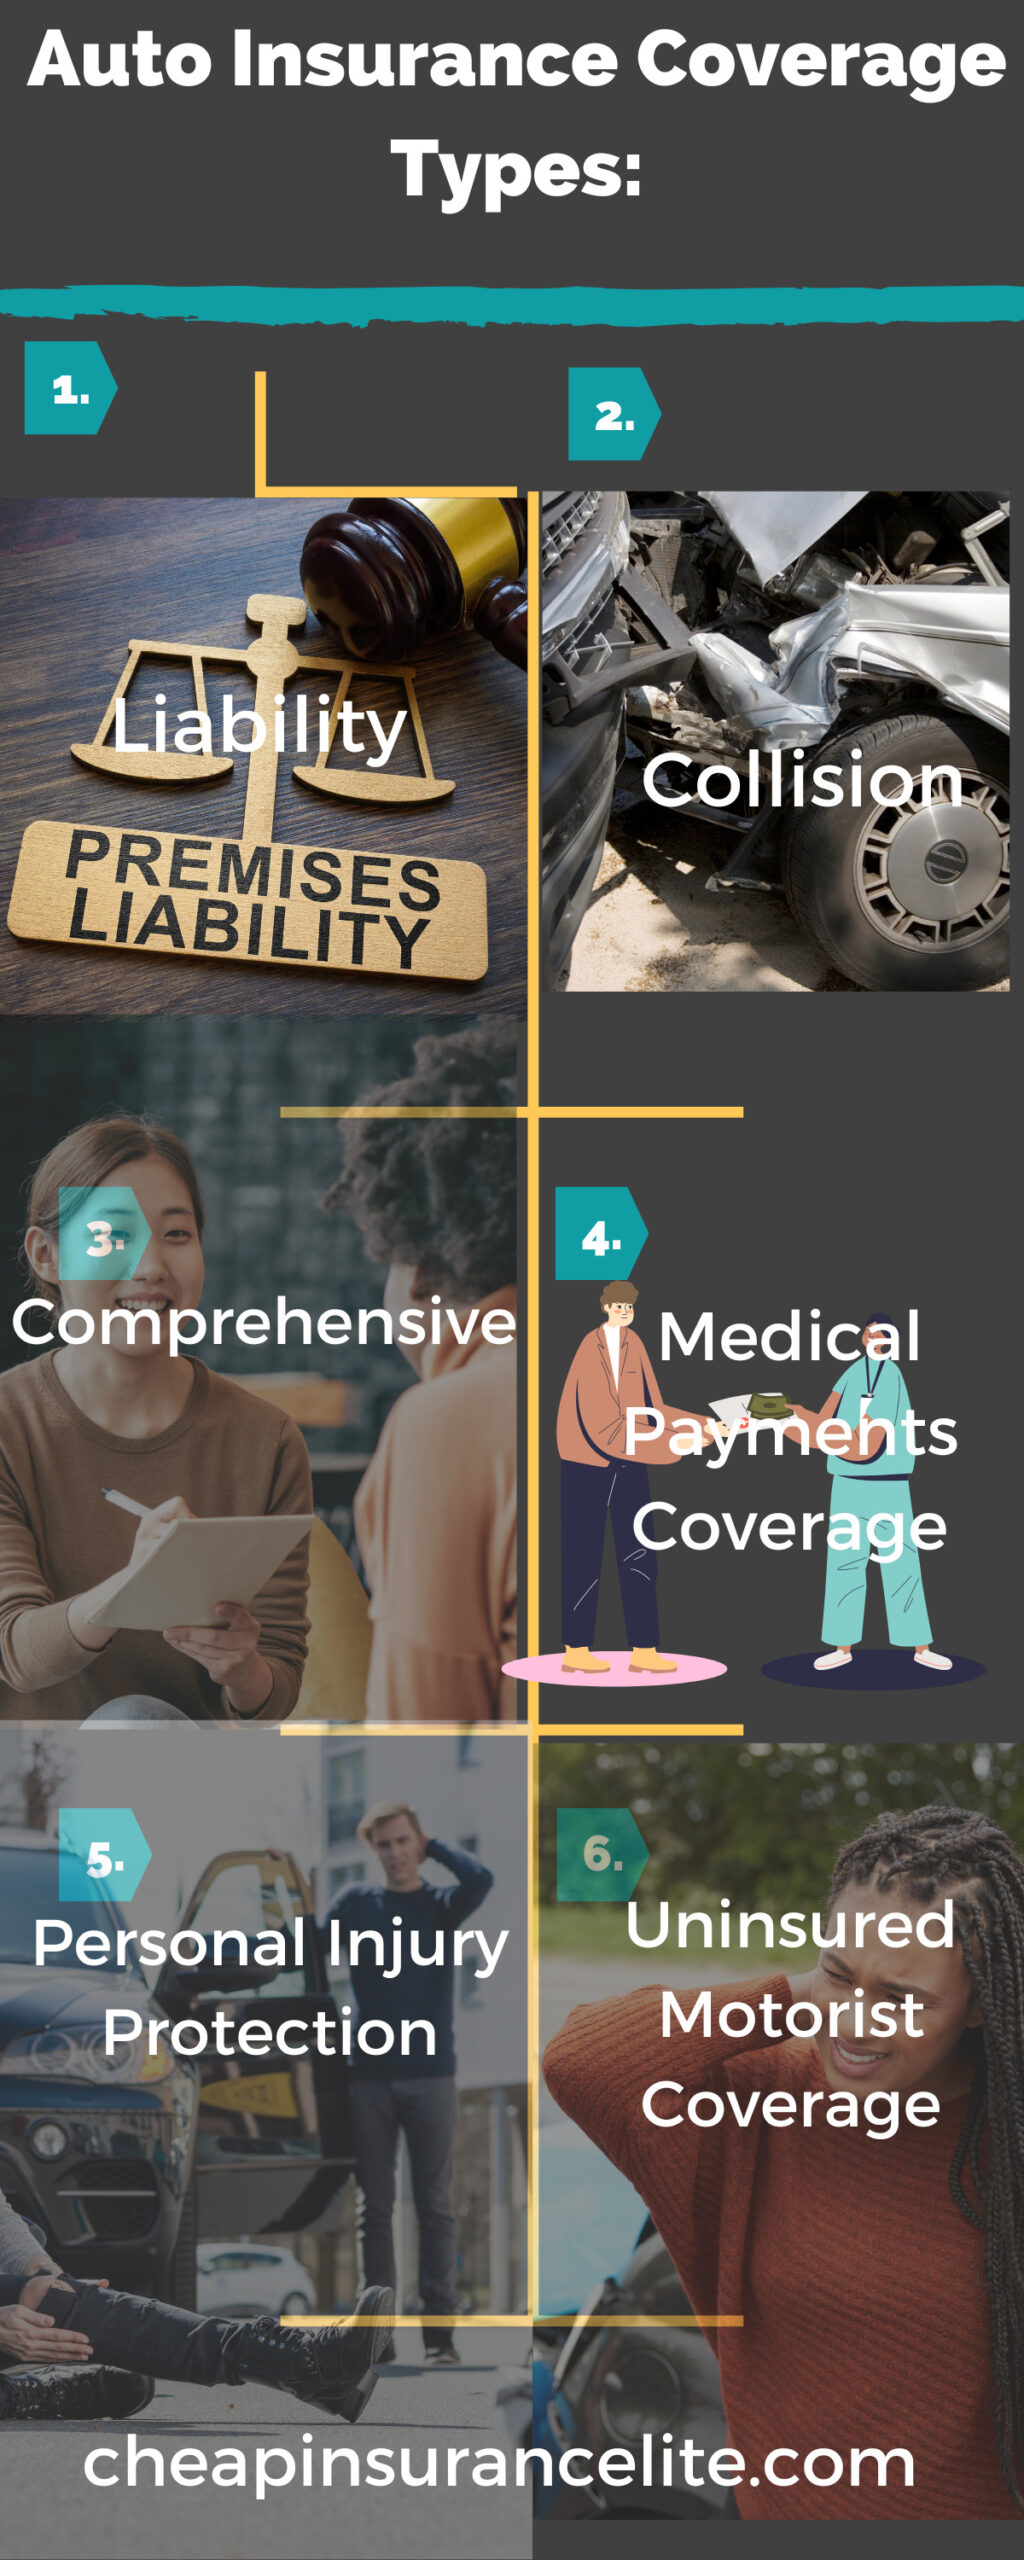 An infographic on Auto Insurance Coverage Types